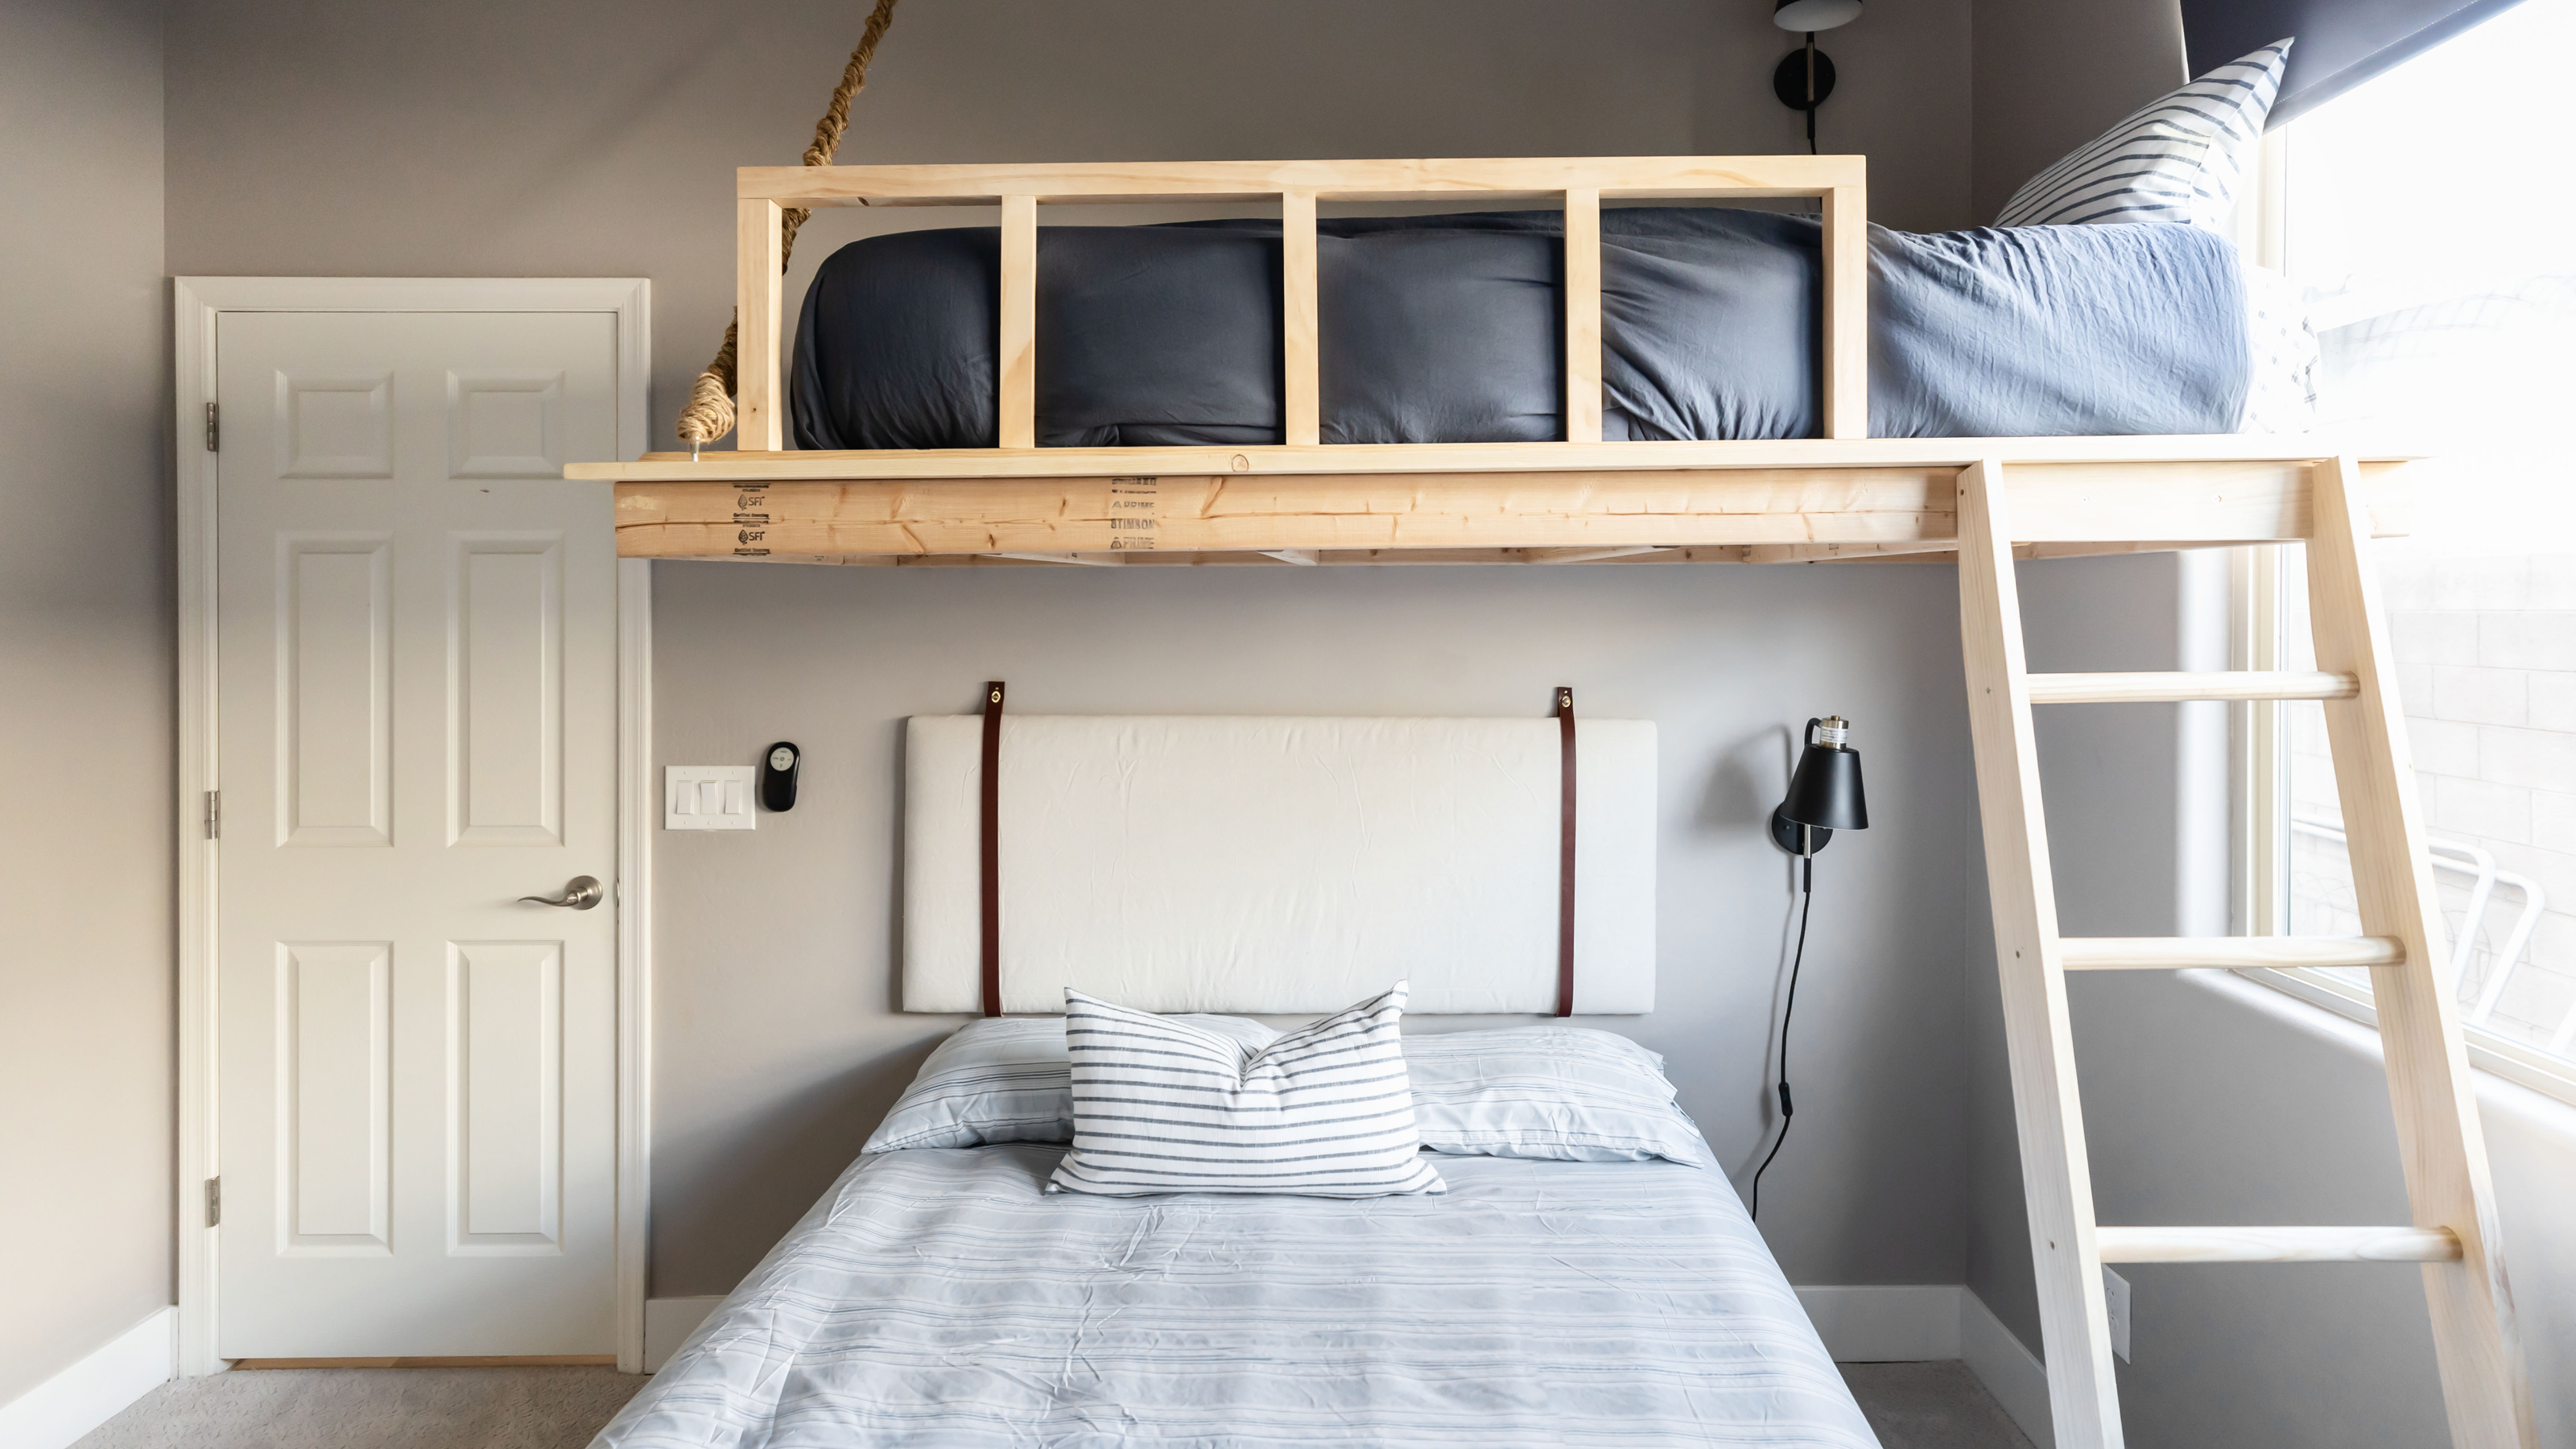 How To Build A Loft Bed Diy With This, Bunk Bed Height Extension